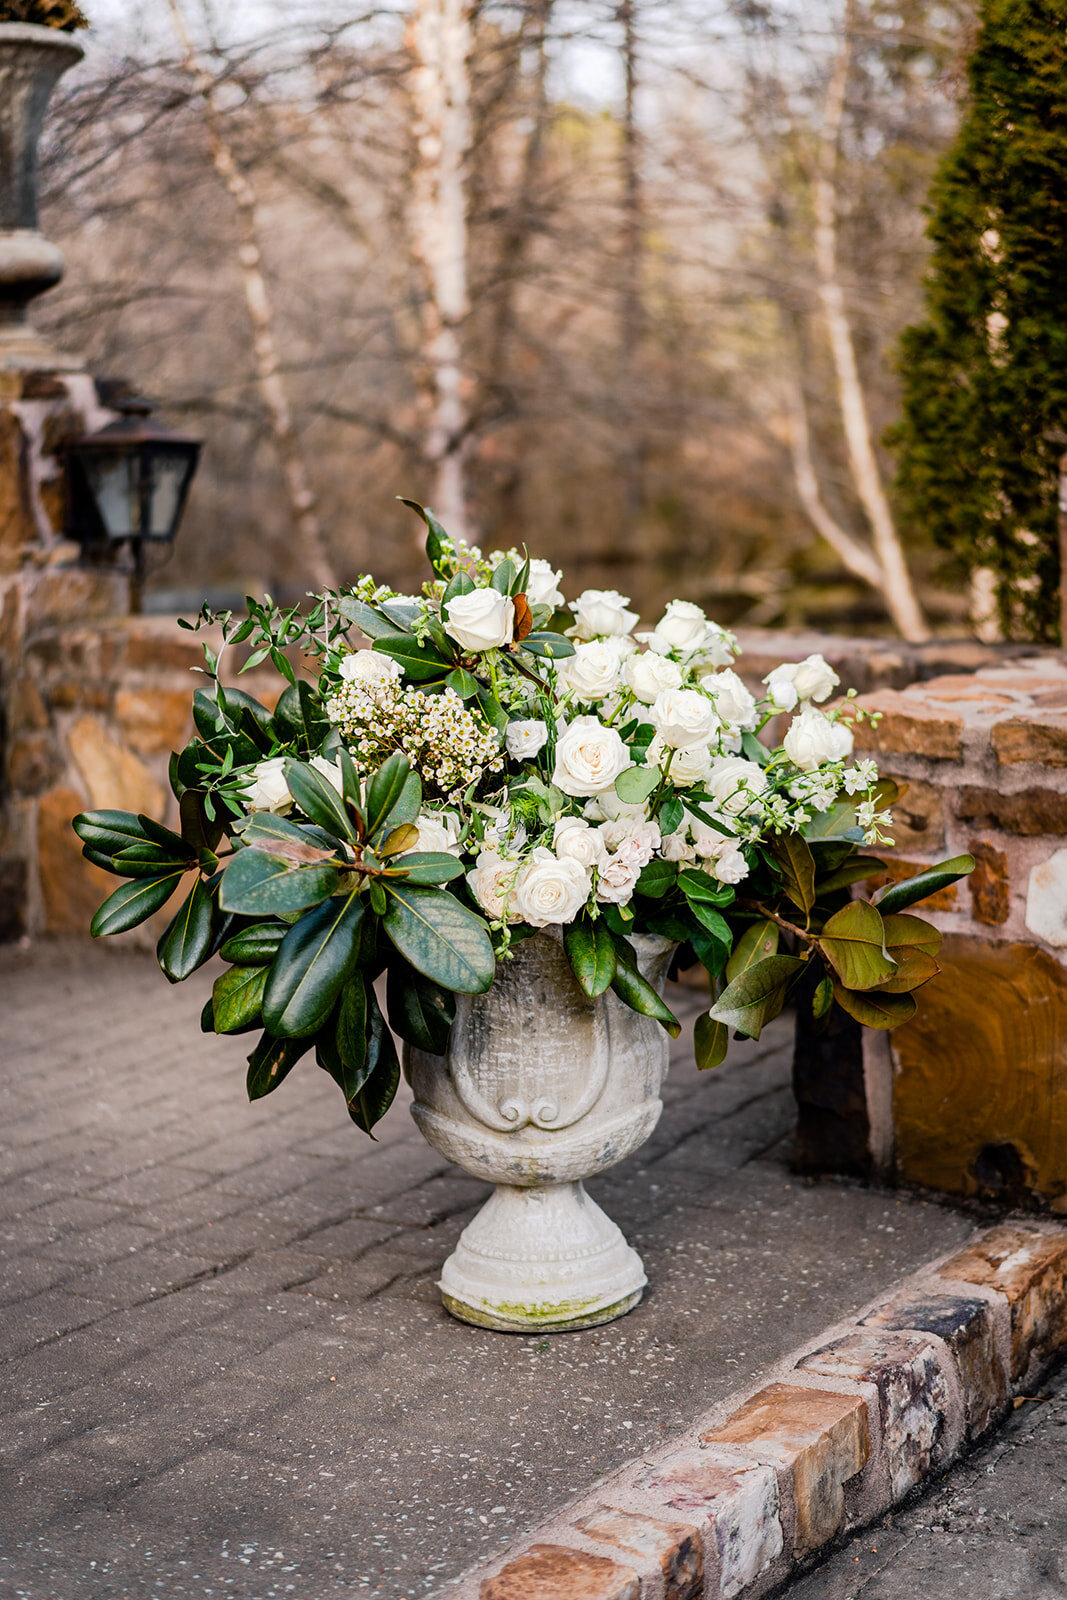 green and white wedding floral arrangement in stone urn